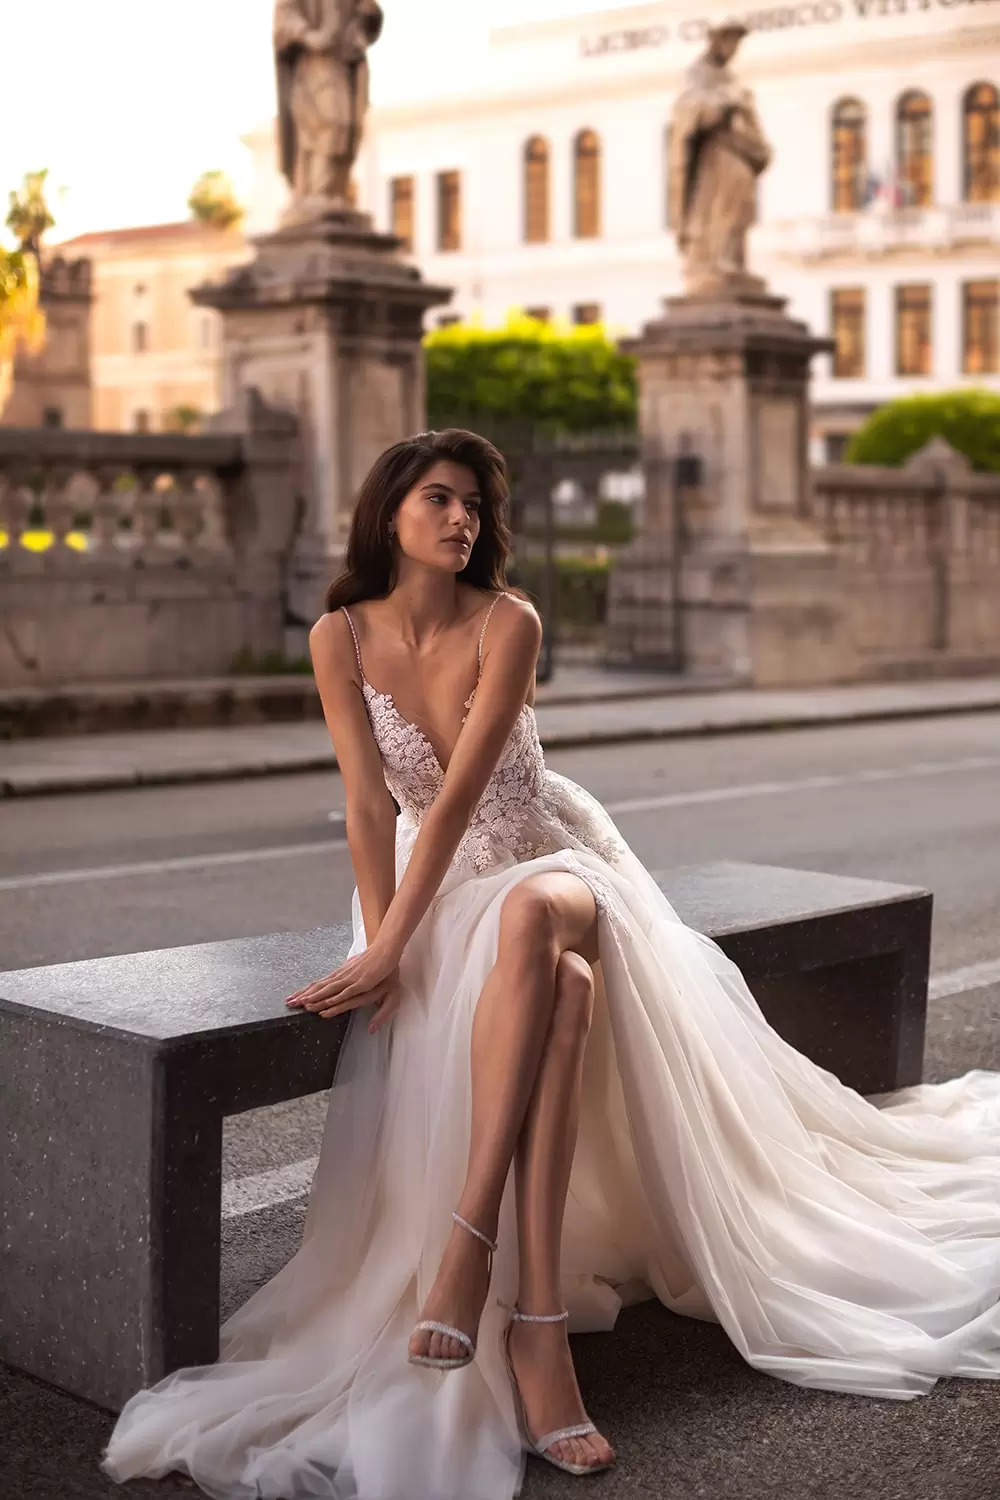 Made 4 Love” Bridal Collection by Eva Lendel : Alessia